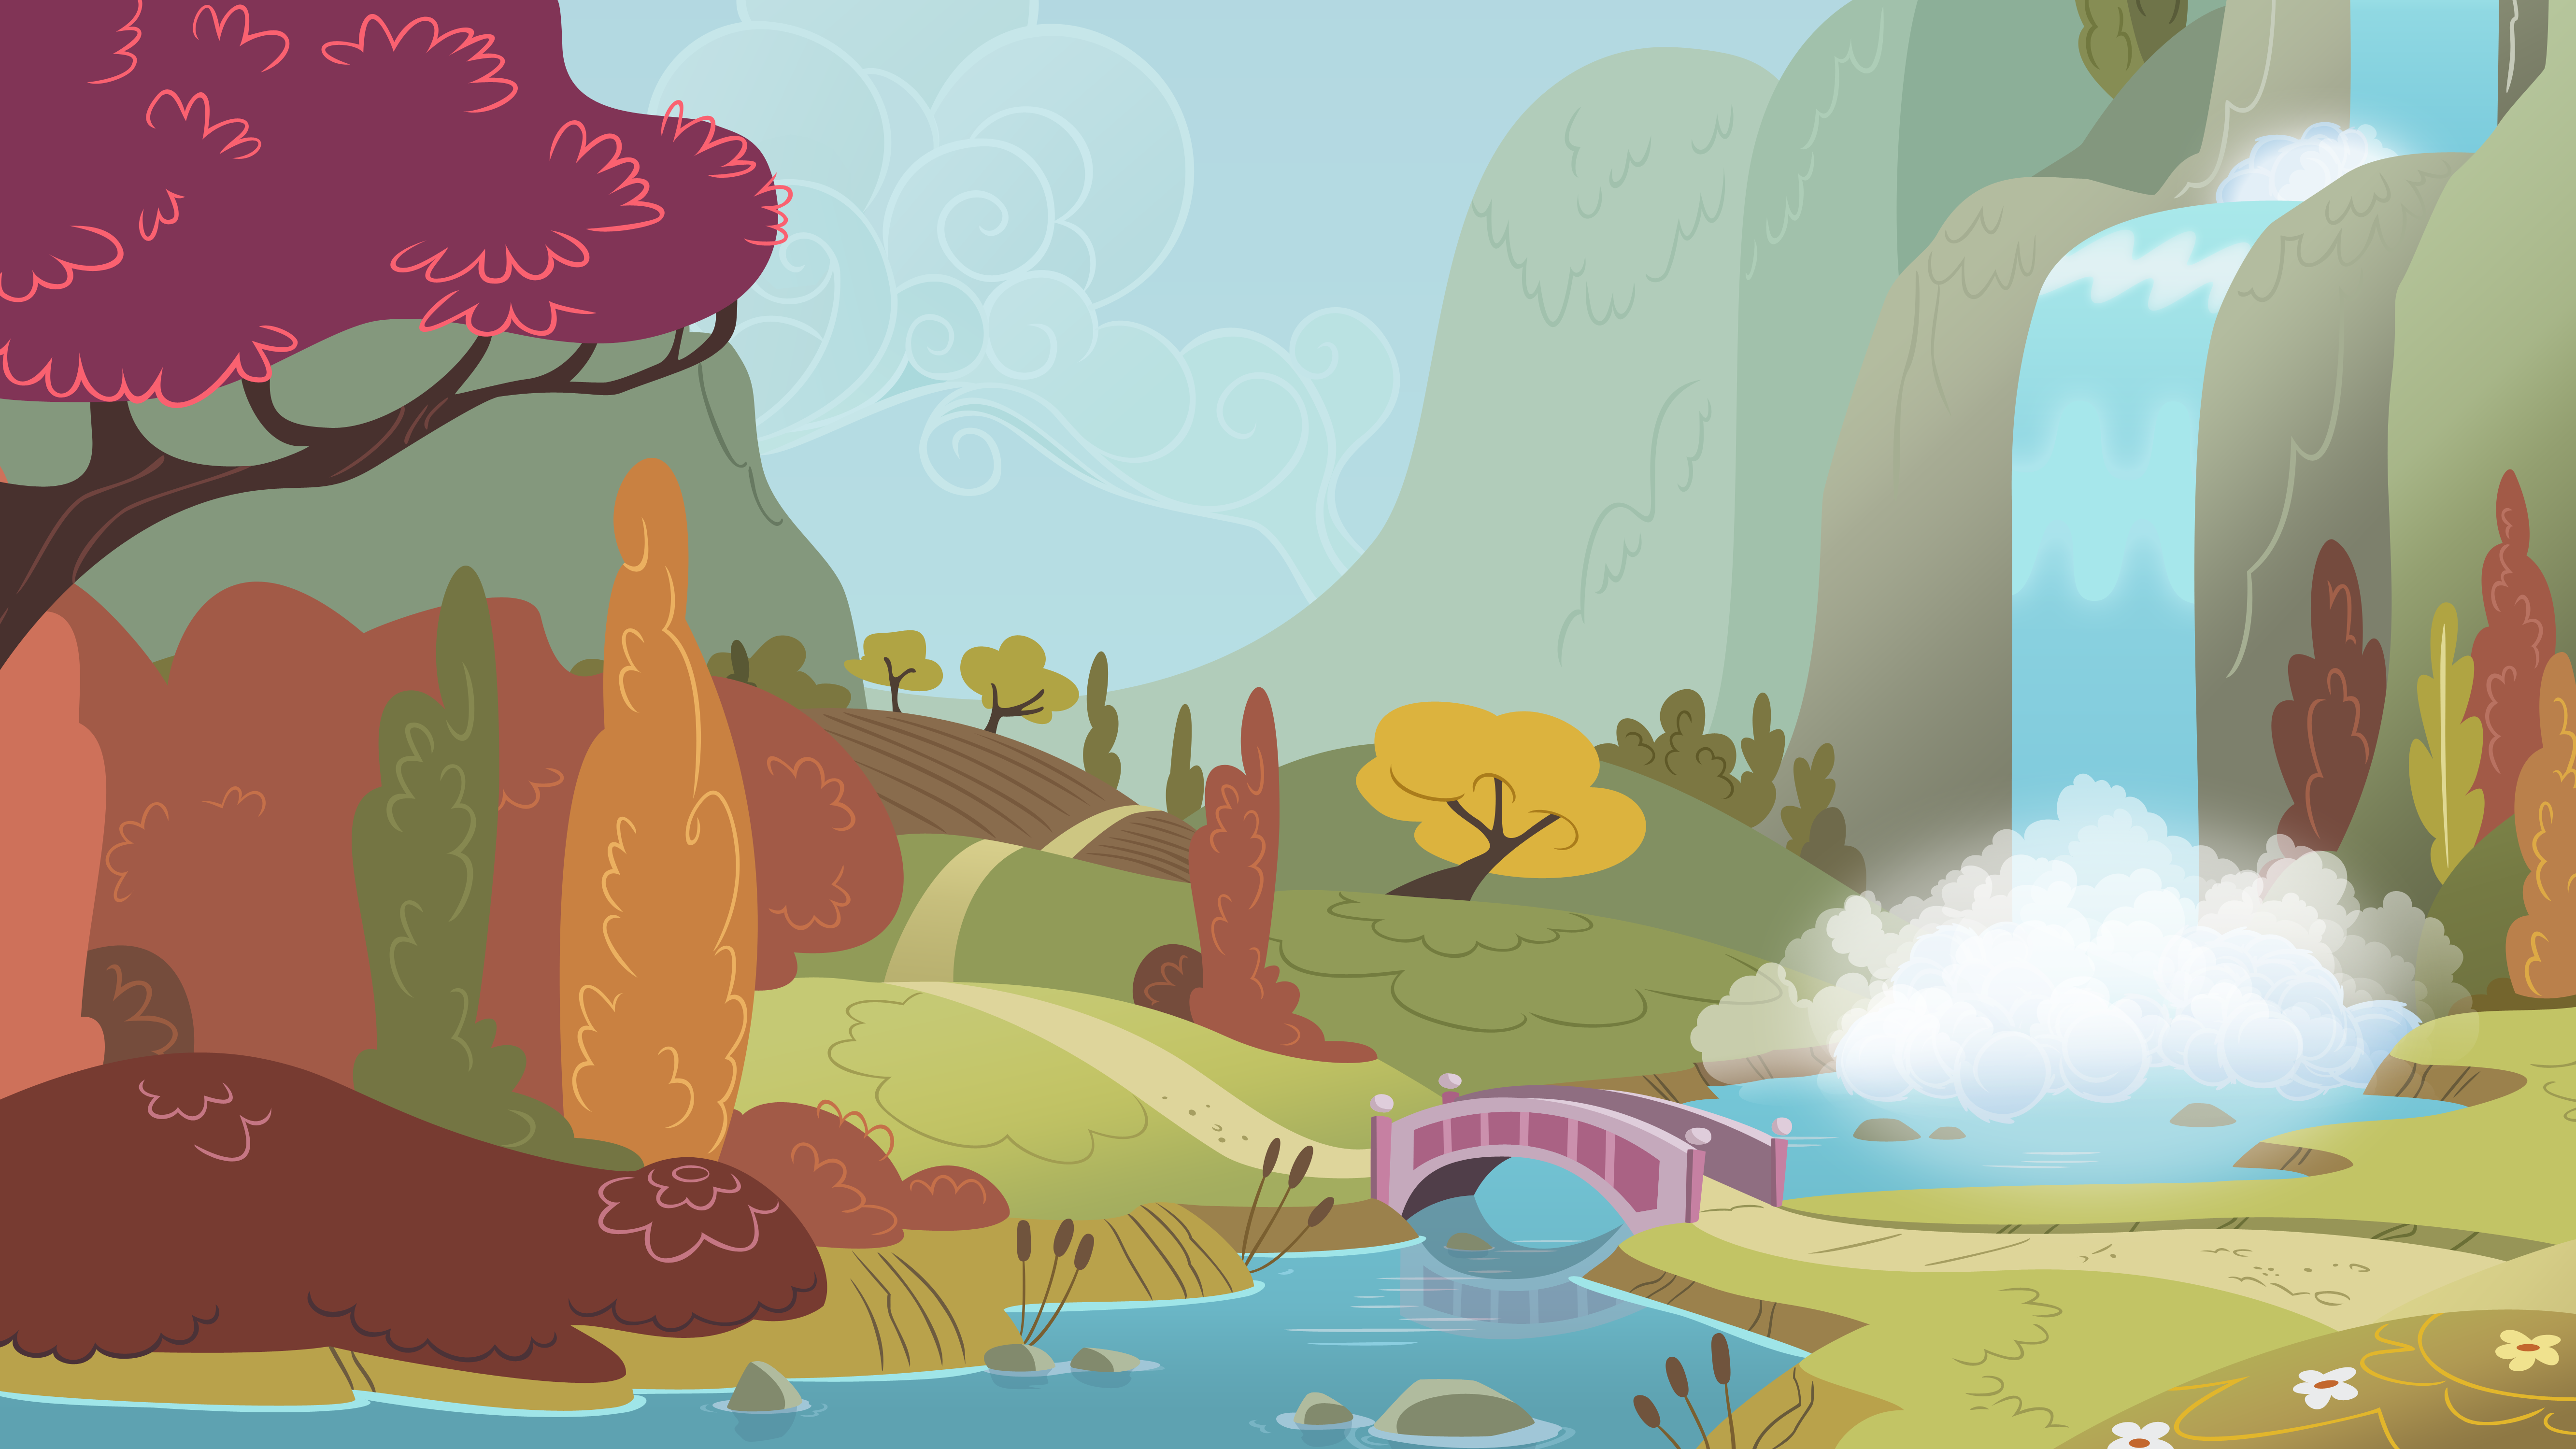 Background Scenery Autumn Valley by TimeImpact